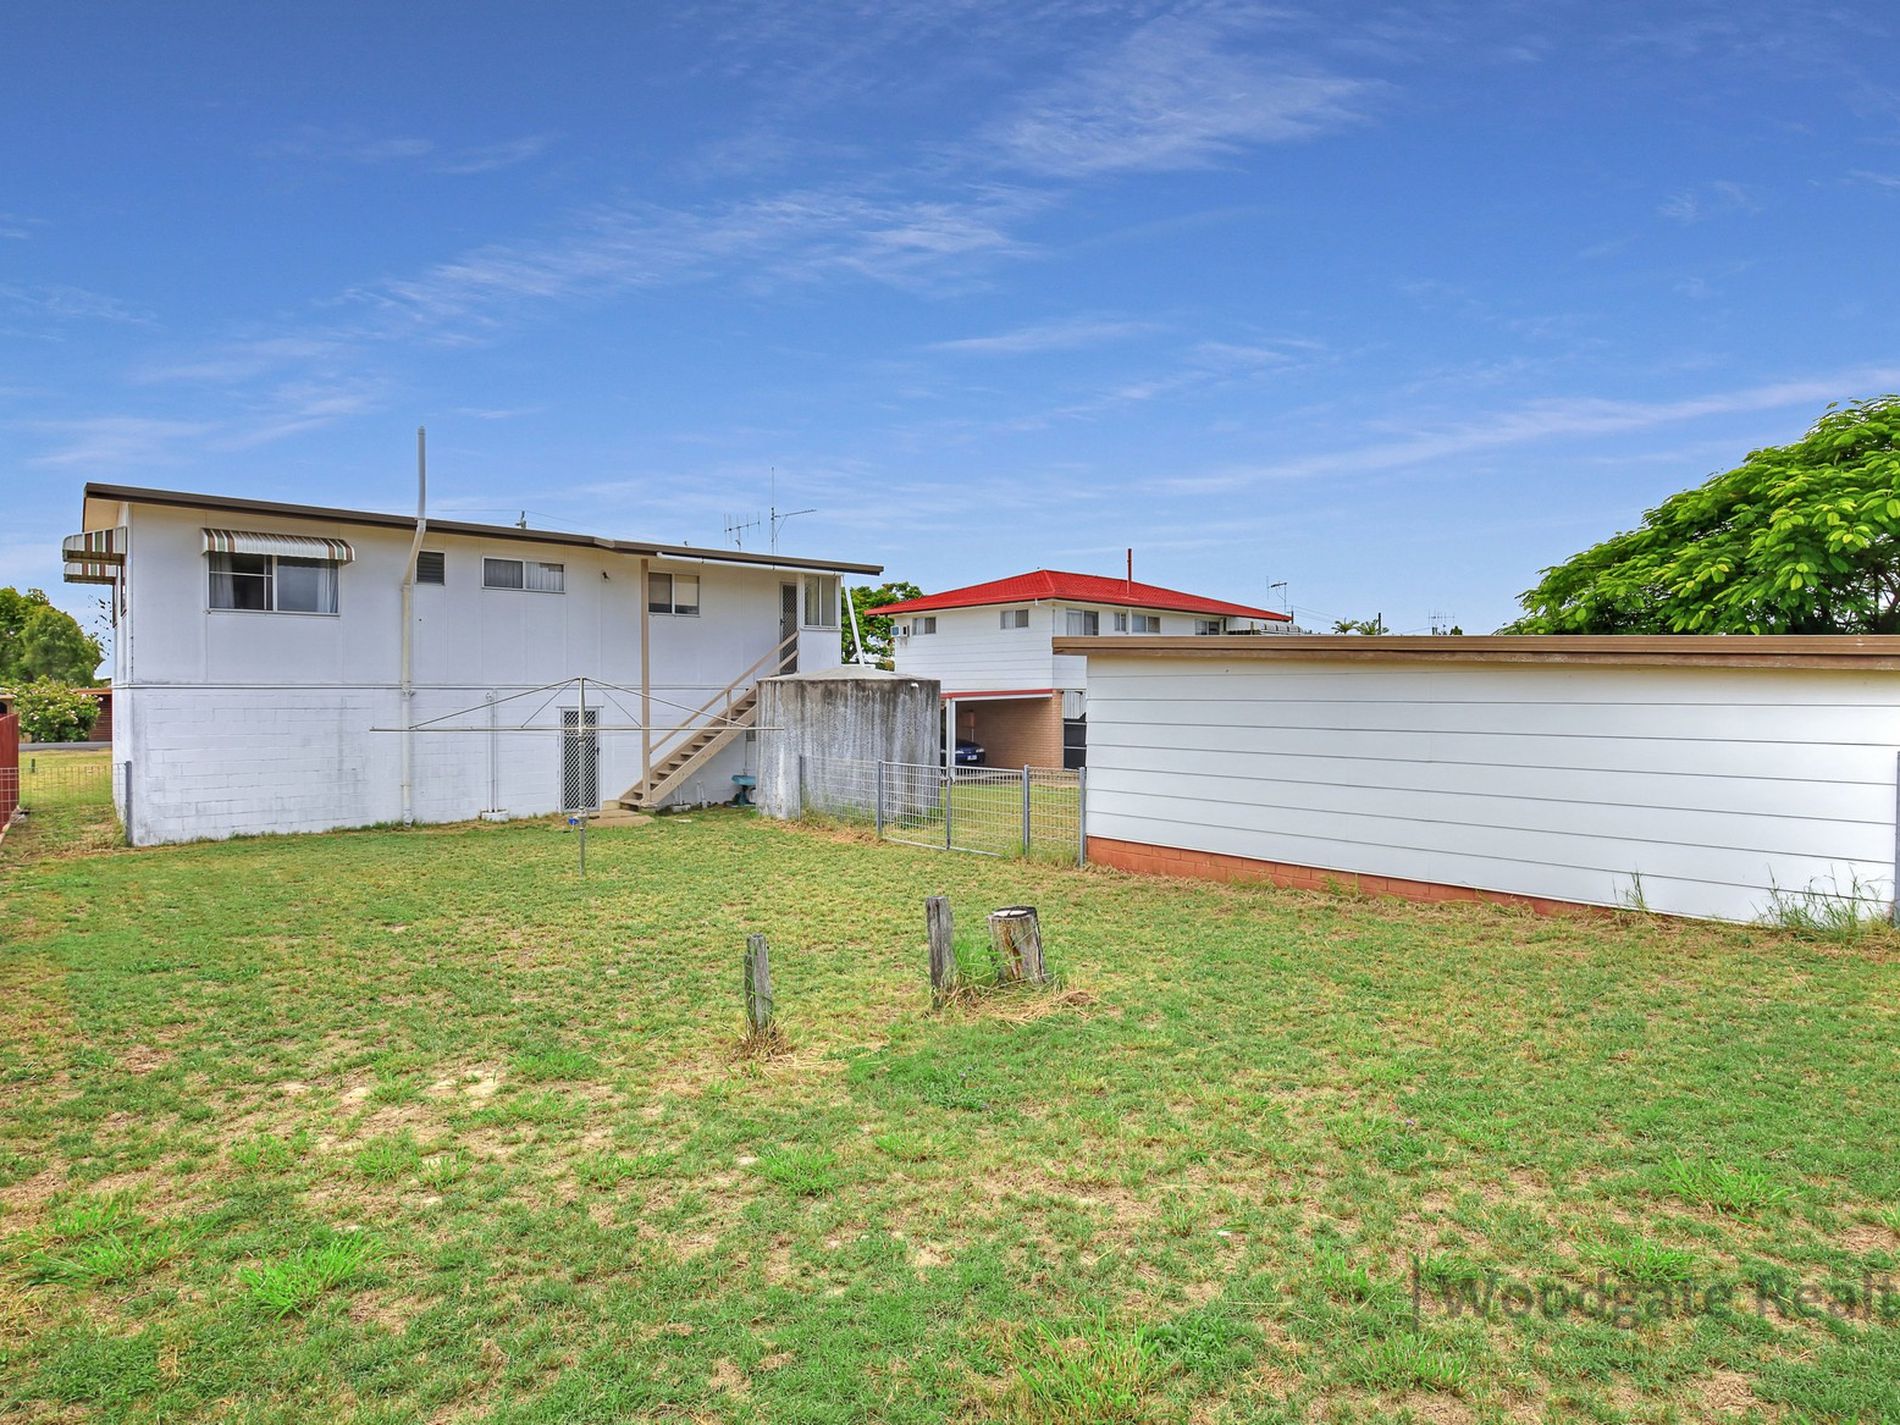 17 WHITING STREET, Woodgate